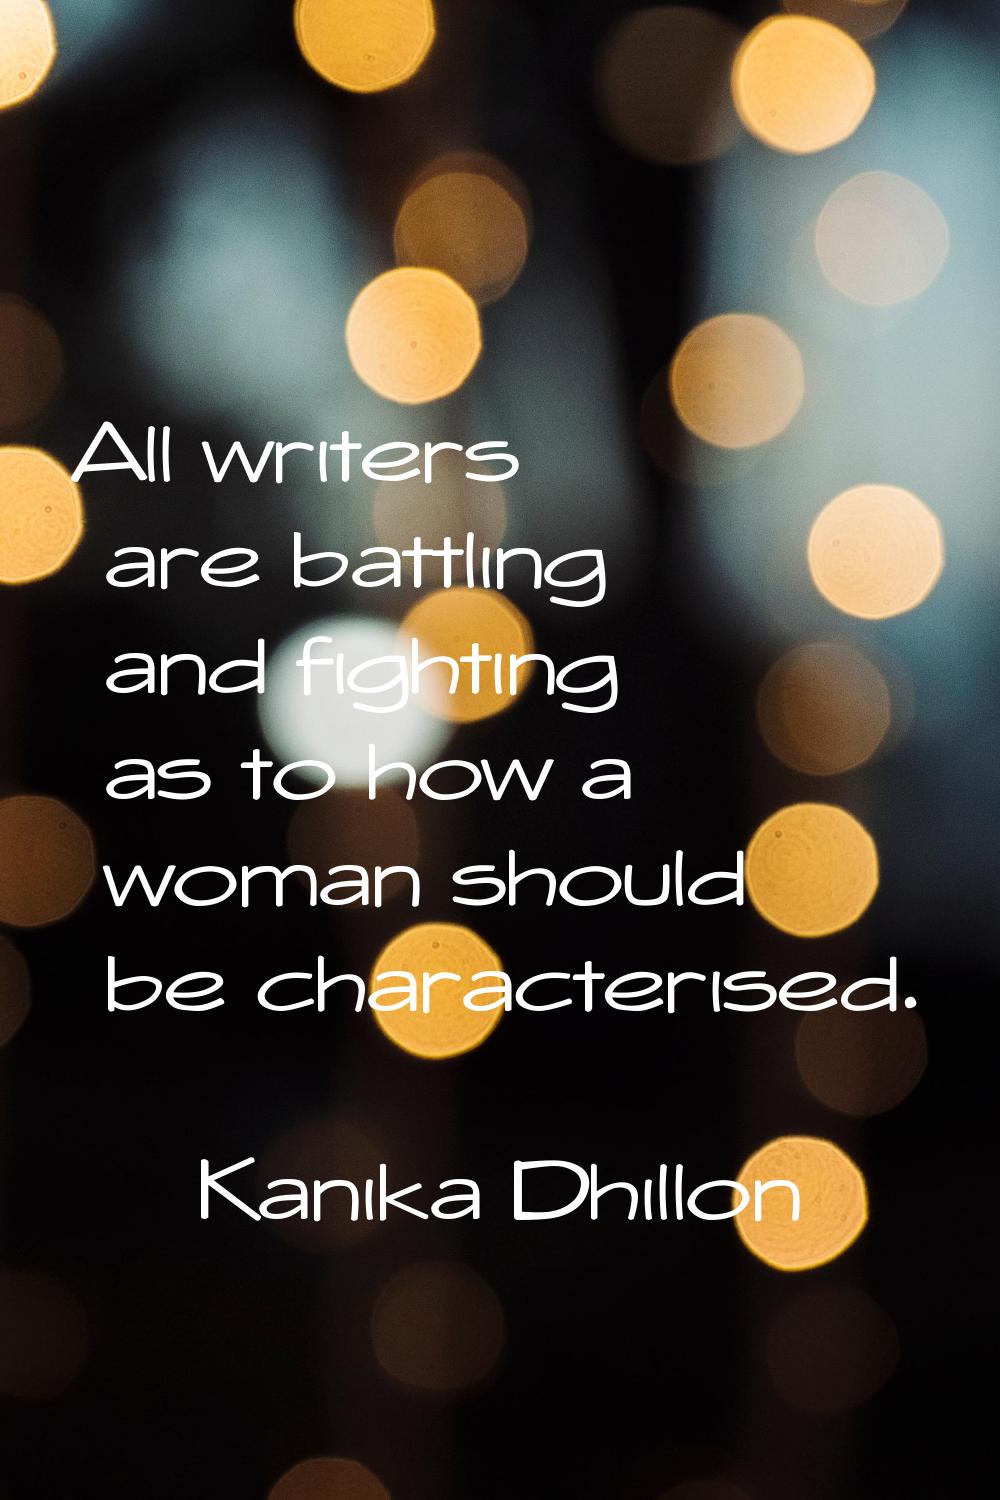 All writers are battling and fighting as to how a woman should be characterised.